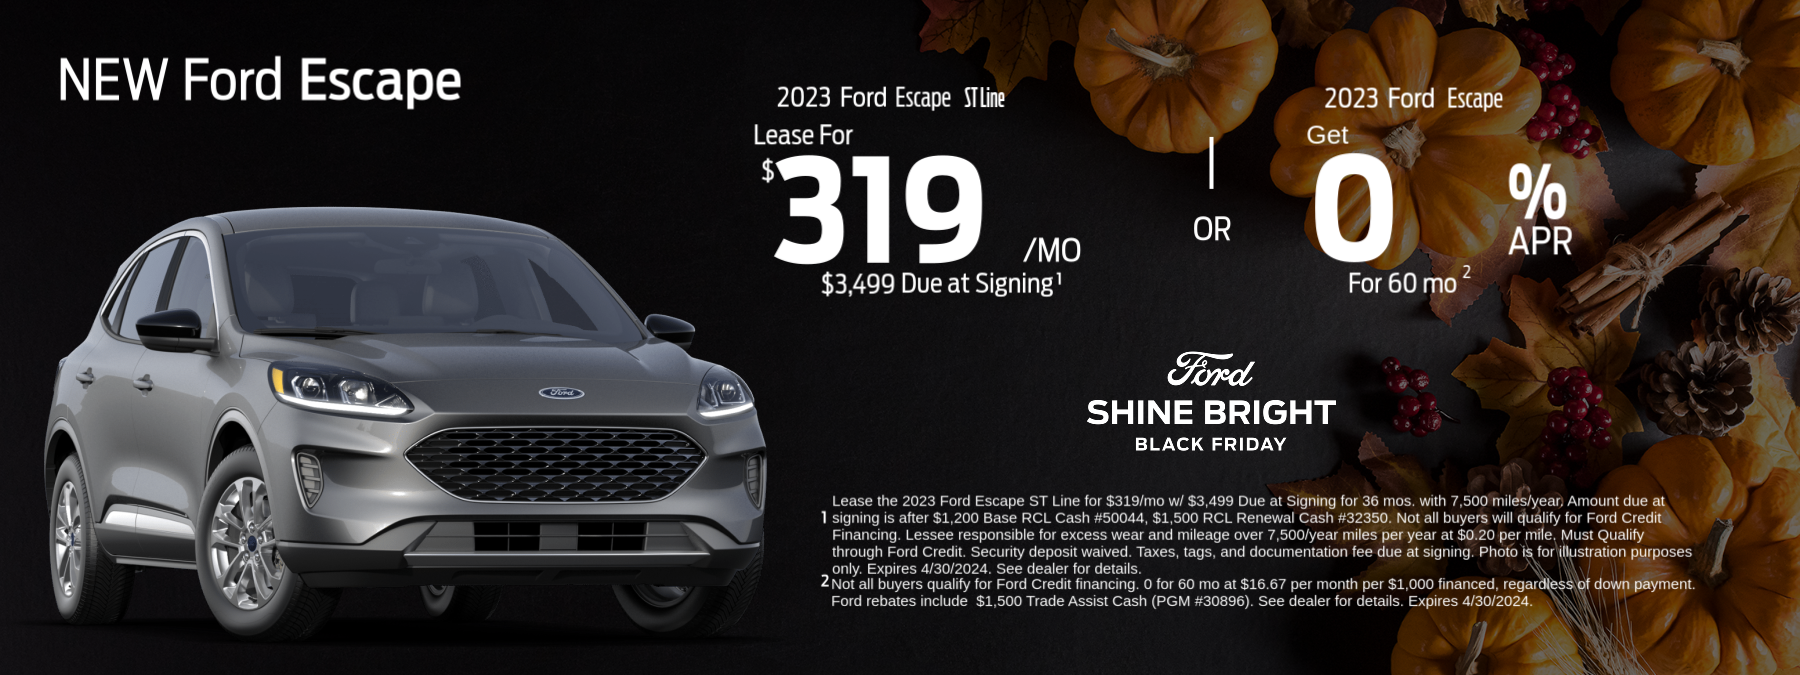 Check out great new offers on the Ford Escape!